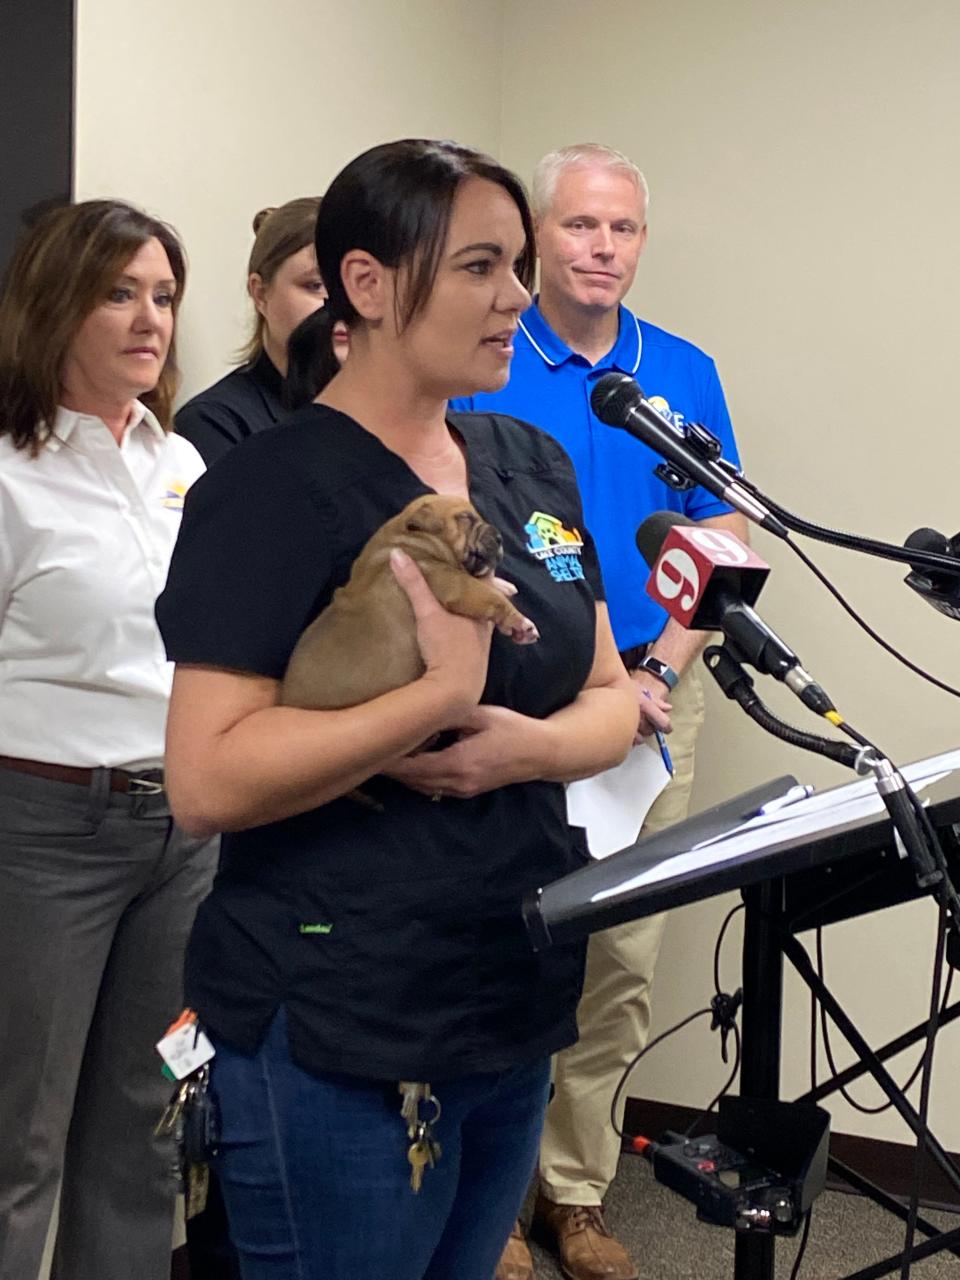 Whitney Boylston, director of Lake Animal Services, holds a puppy Wednesday at a storm preparation news conference to emphasize the need for pet owners to include their animals in hurricane plans.